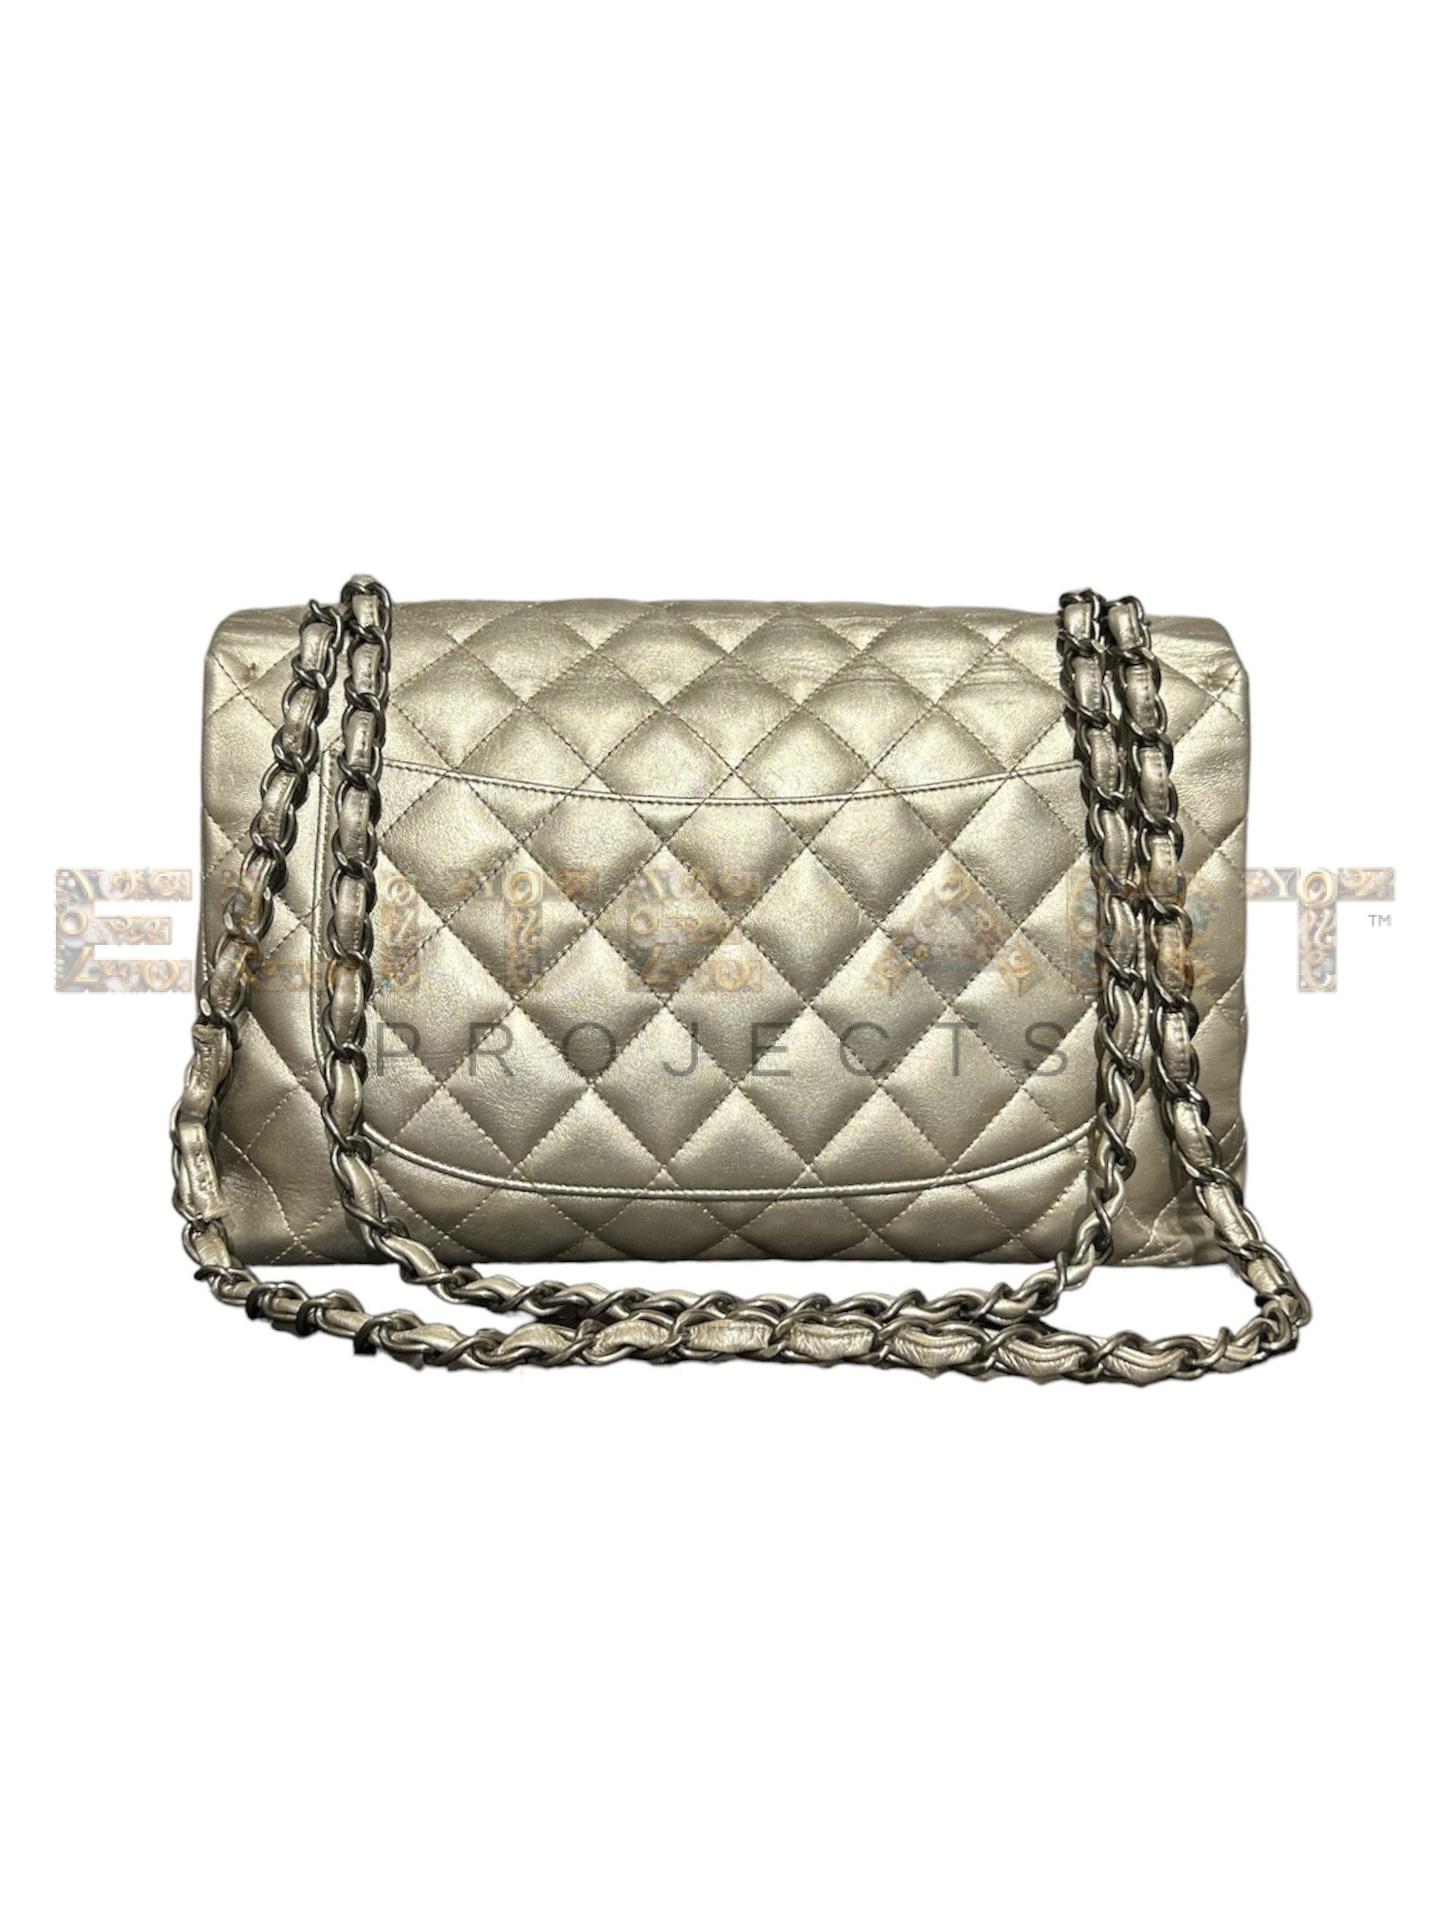 Chanel, Jumbo, bag, quilted, golden leather, silver hardware, smooth interior